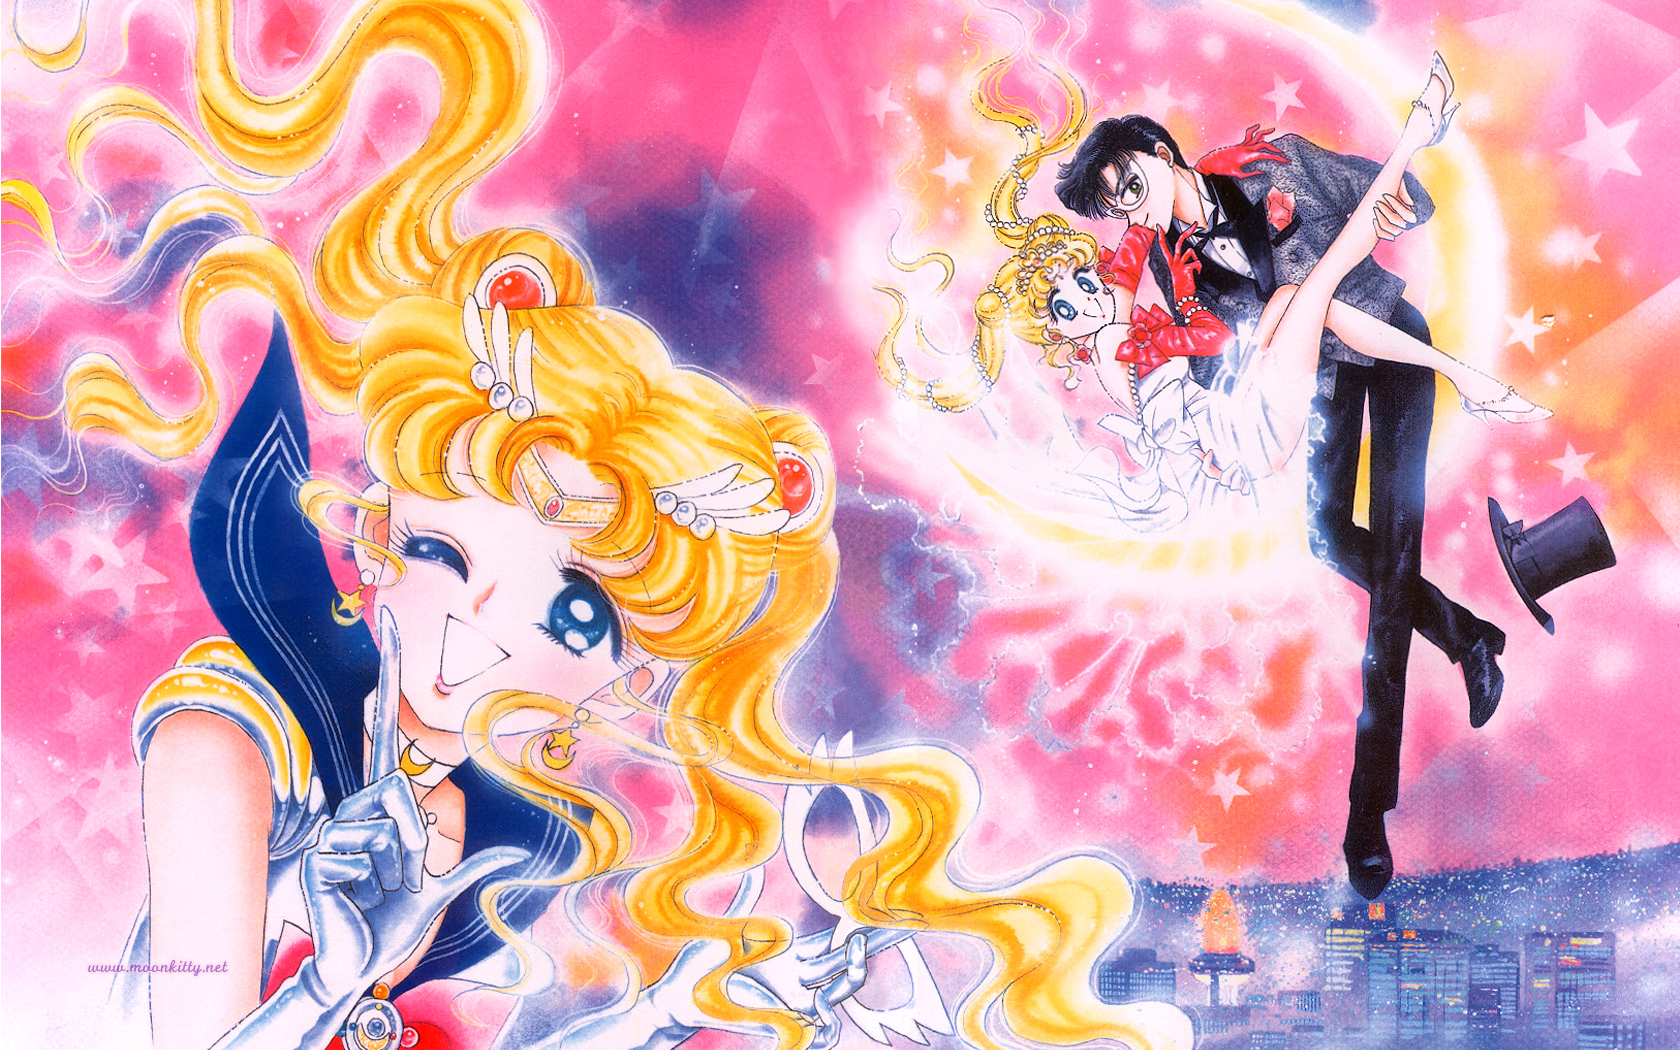 Free Download Superhero Sailor Moon Another Early Image Of Sailor Moon Interesting 1680x1050 For Your Desktop Mobile Tablet Explore 50 Sailor Moon Wallpaper Widescreen Moon Wallpaper Hd Sailor Moon